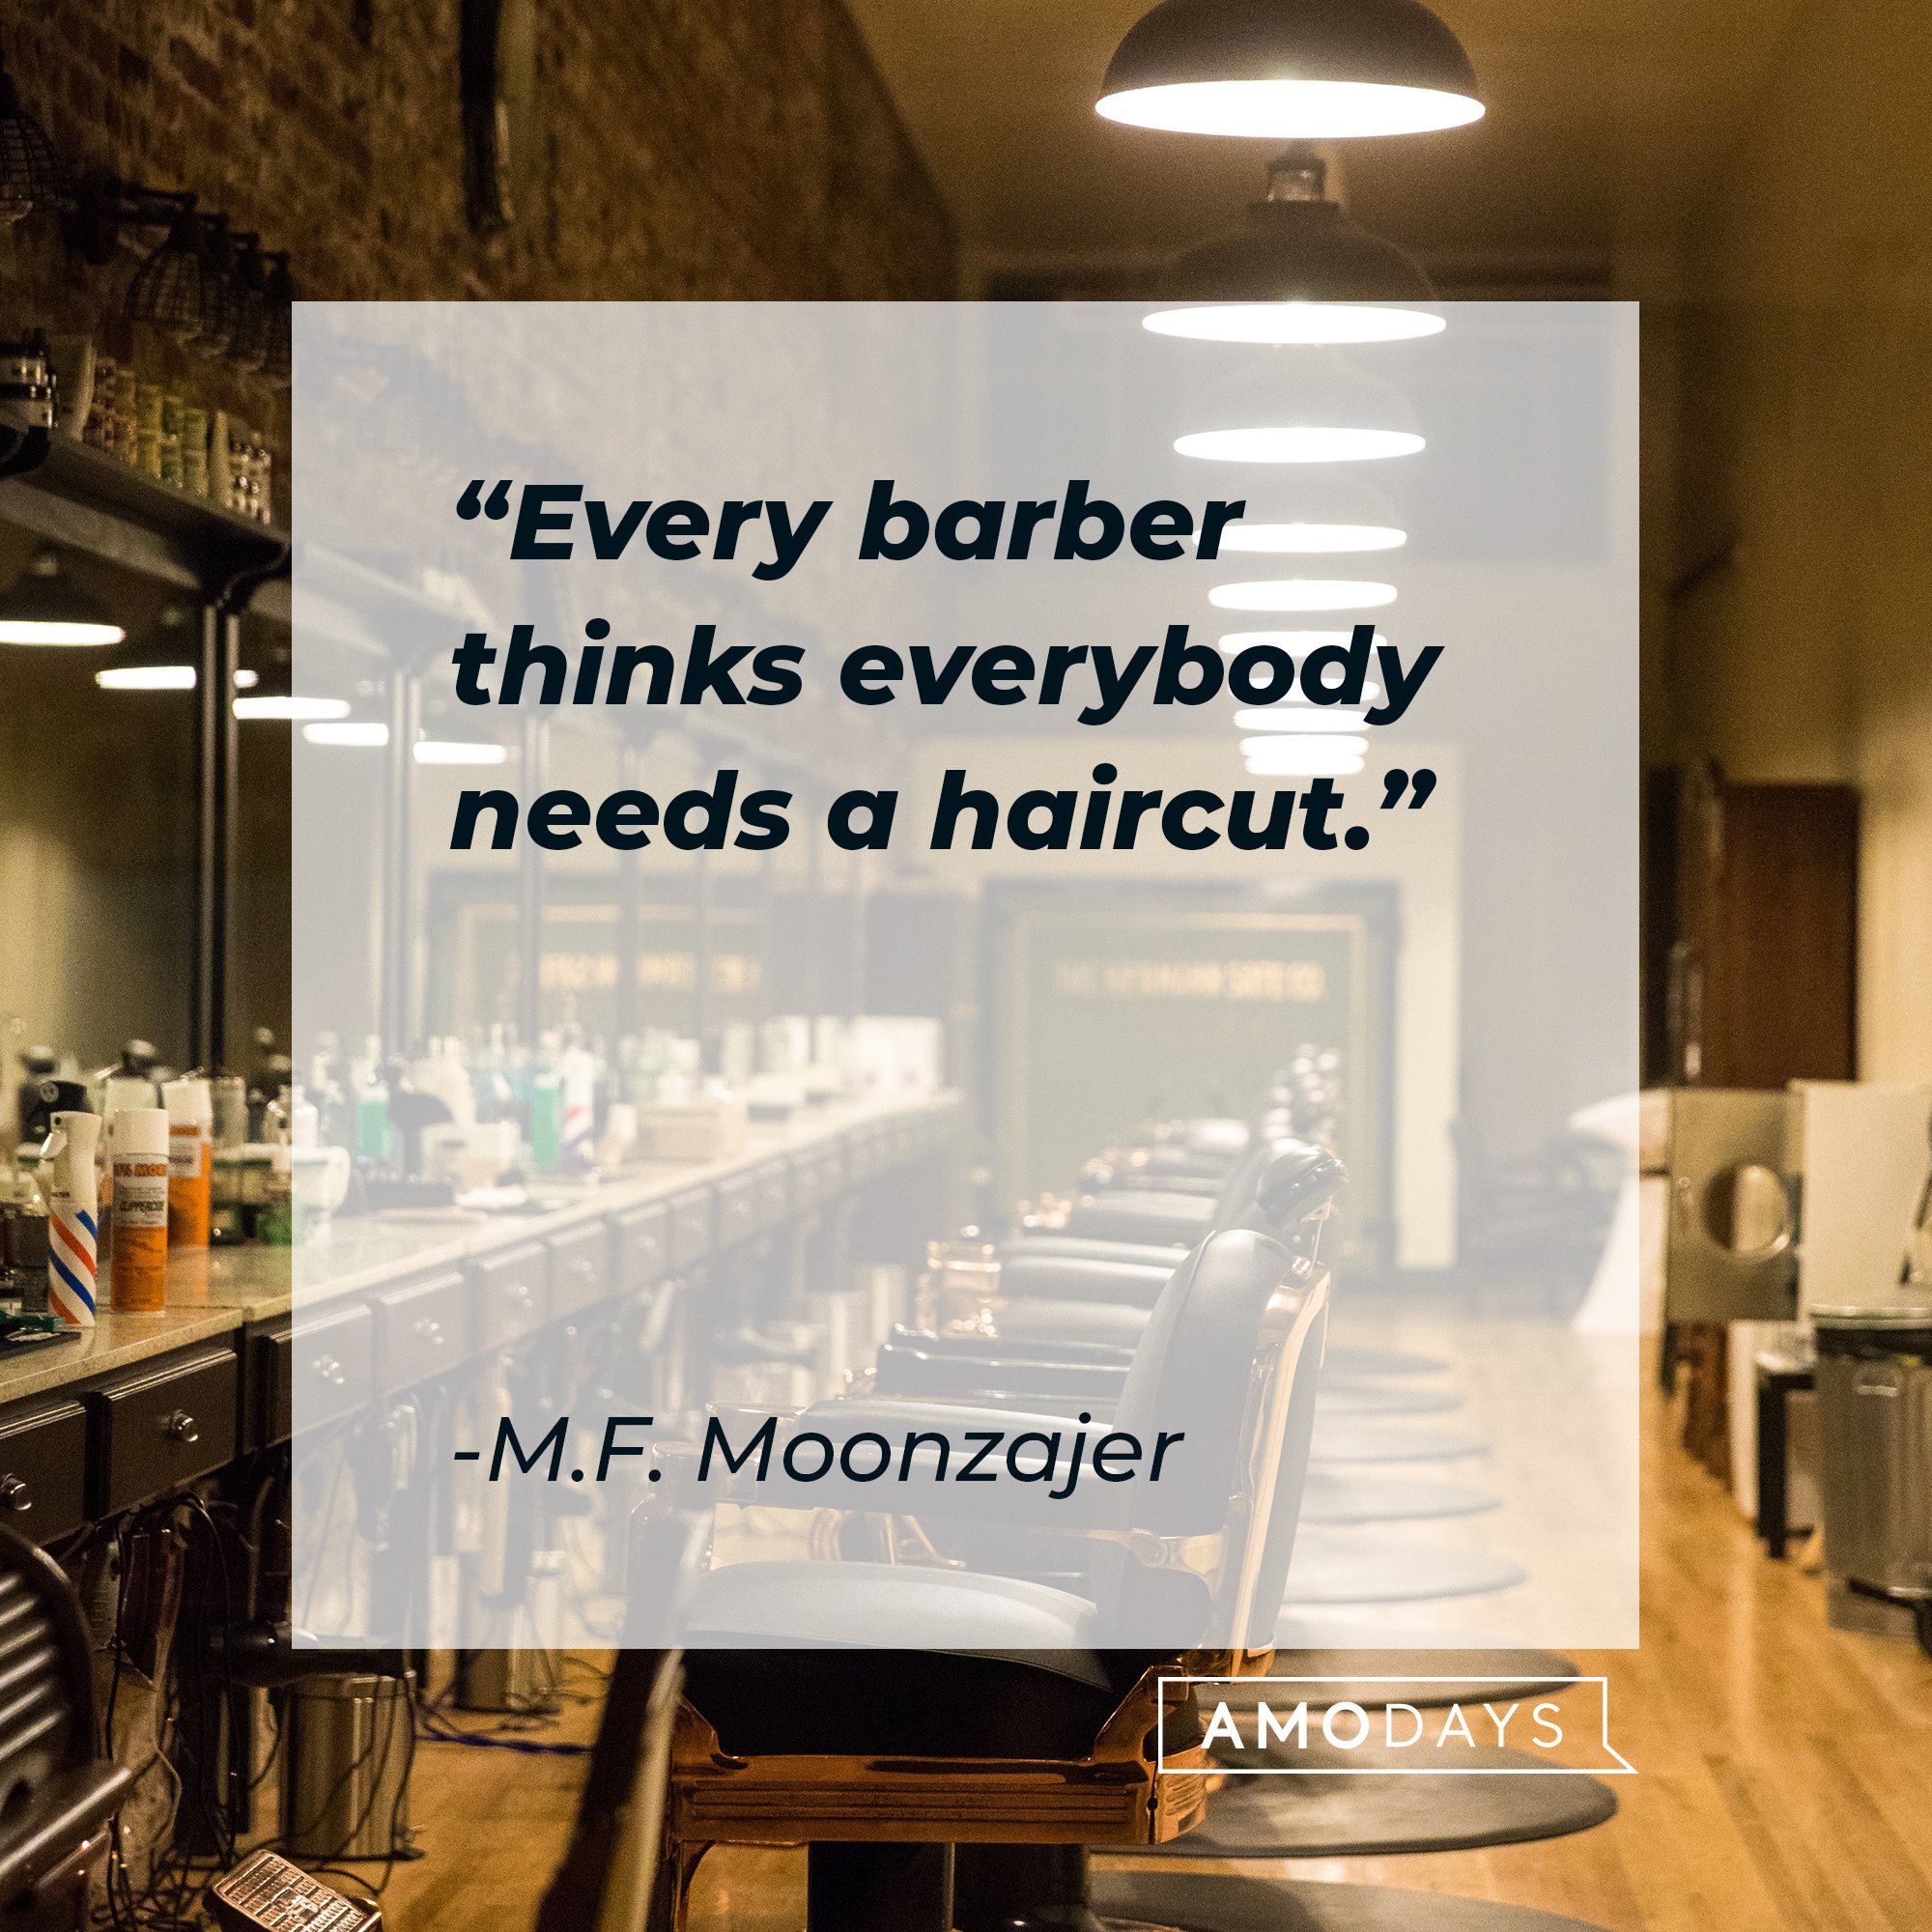 M.F. Moonzajer's quote: "Every barber thinks everybody needs a haircut." | Image: AmoDays